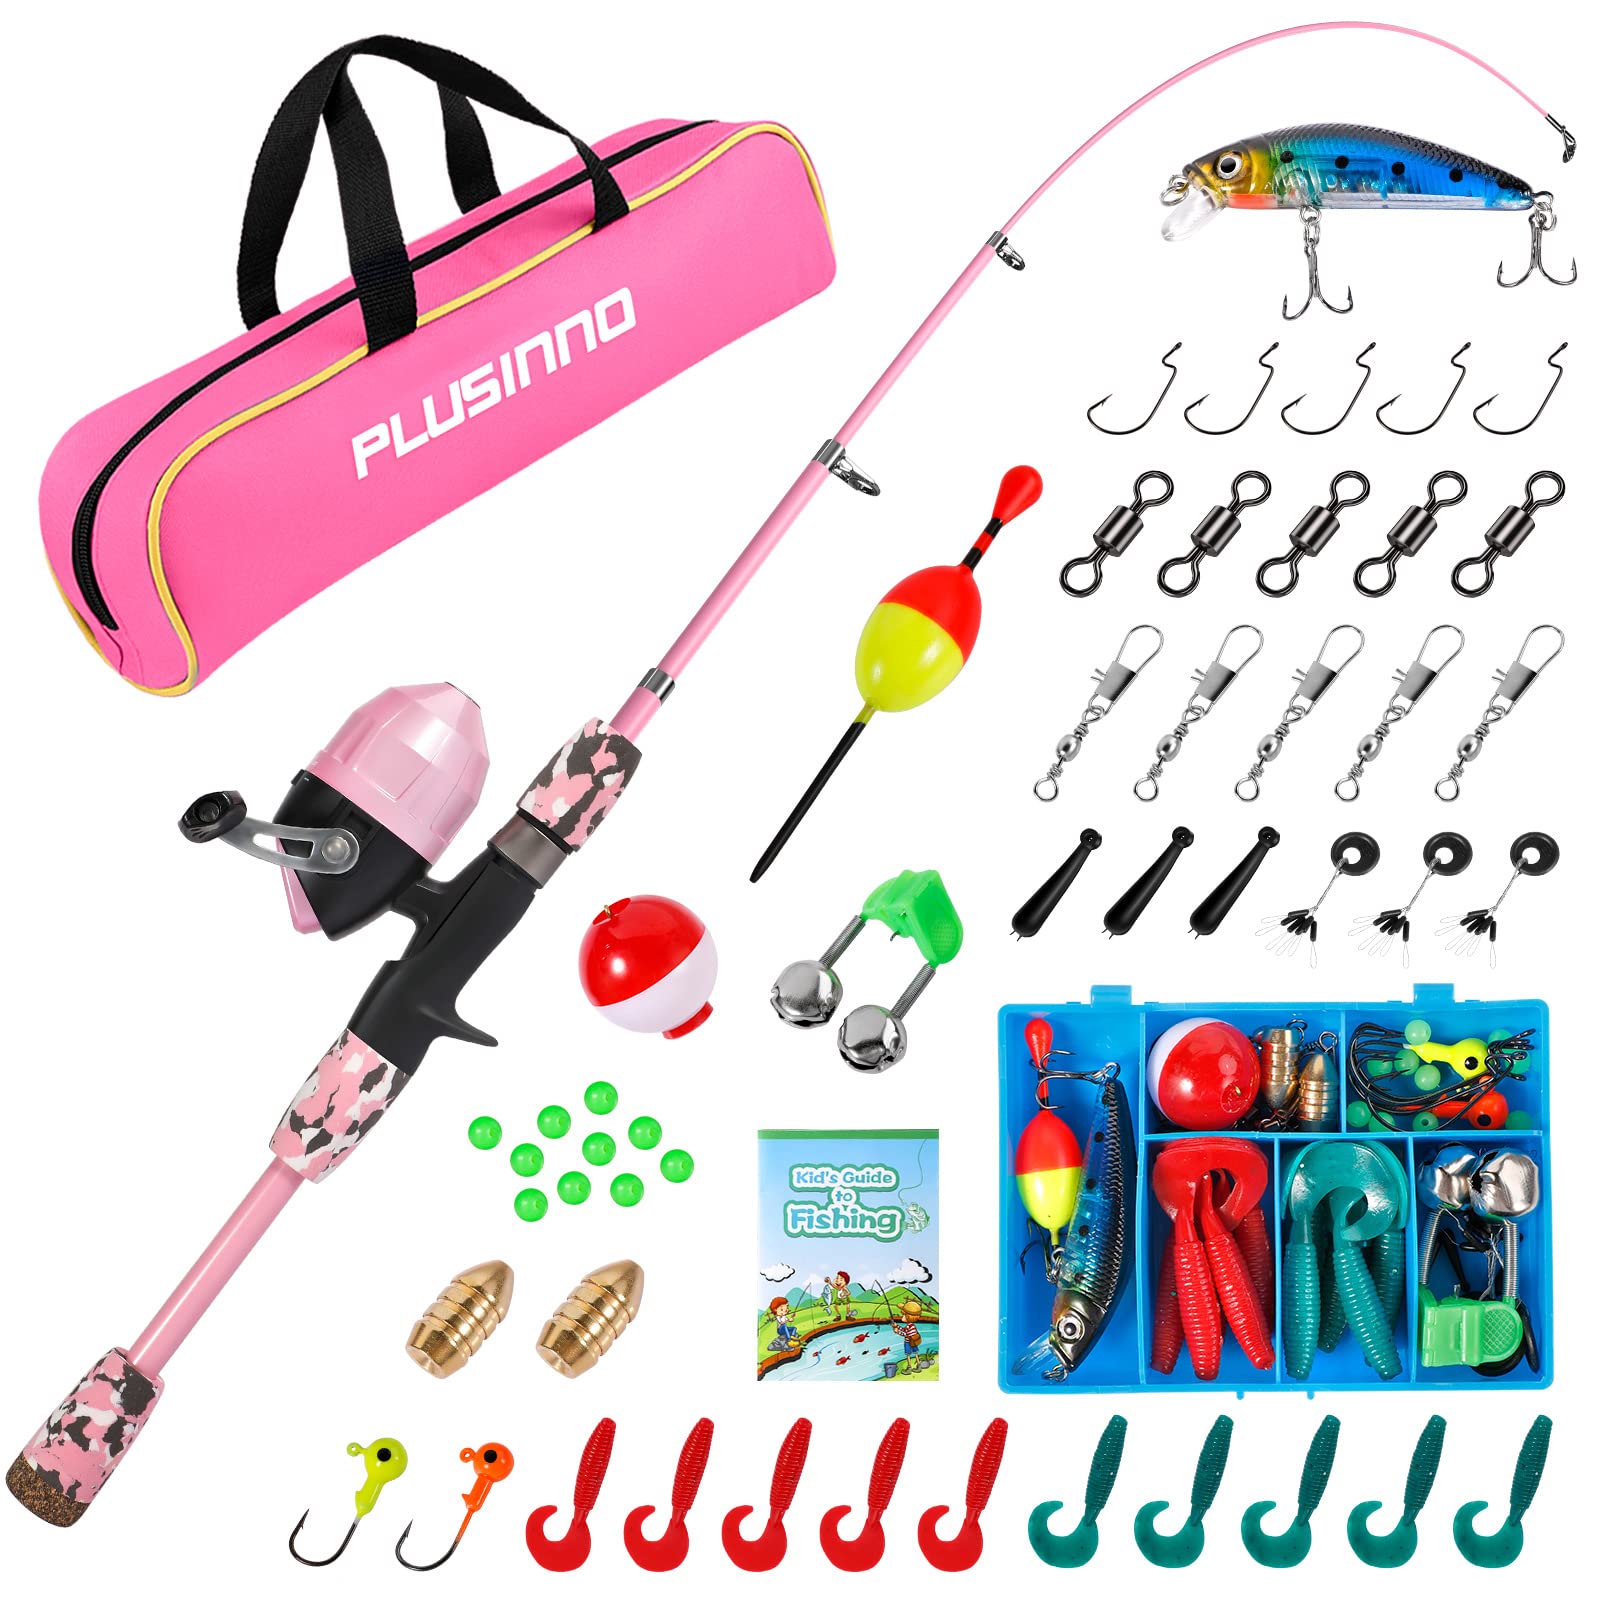 Casting Rod and Reel Set Fishing Rod and Reel Combo Kids Fishing Tackle  Kids Fishing Rod spincast Reel Casting Rod Fishing Rod Reel Combo for Kids